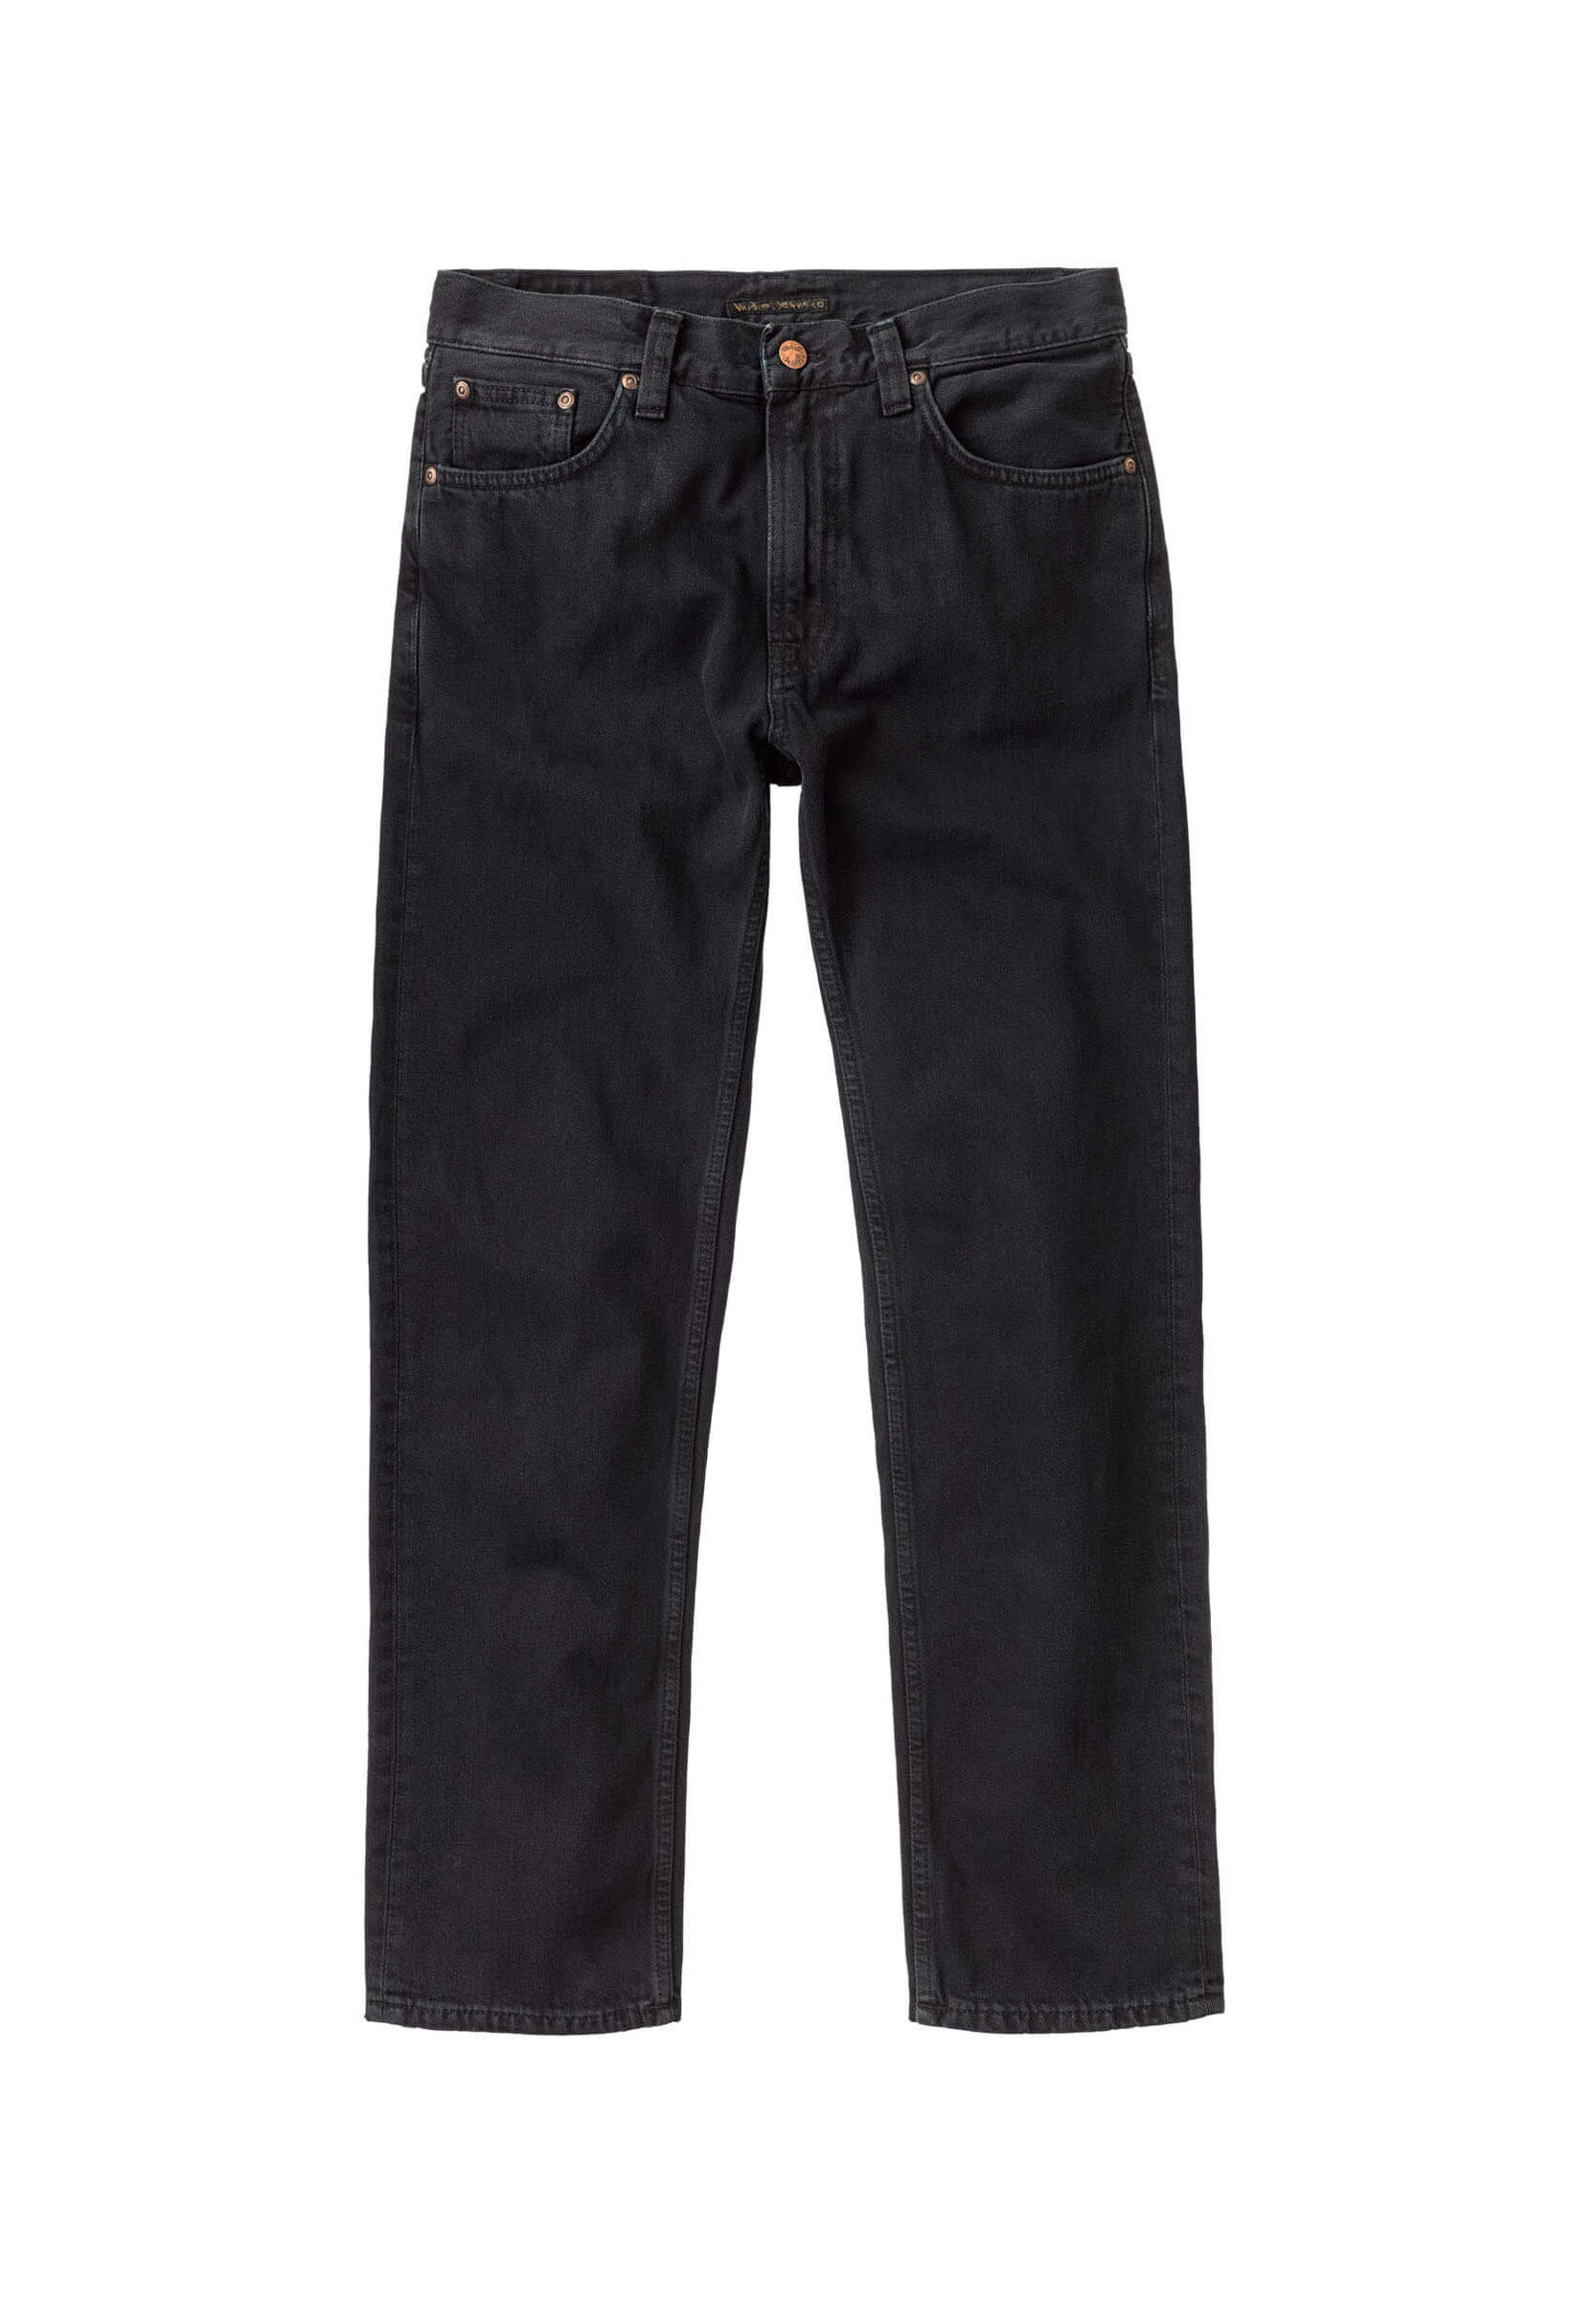 NUDIE JEANS Jeans Gritty Jackson black forest 33/32